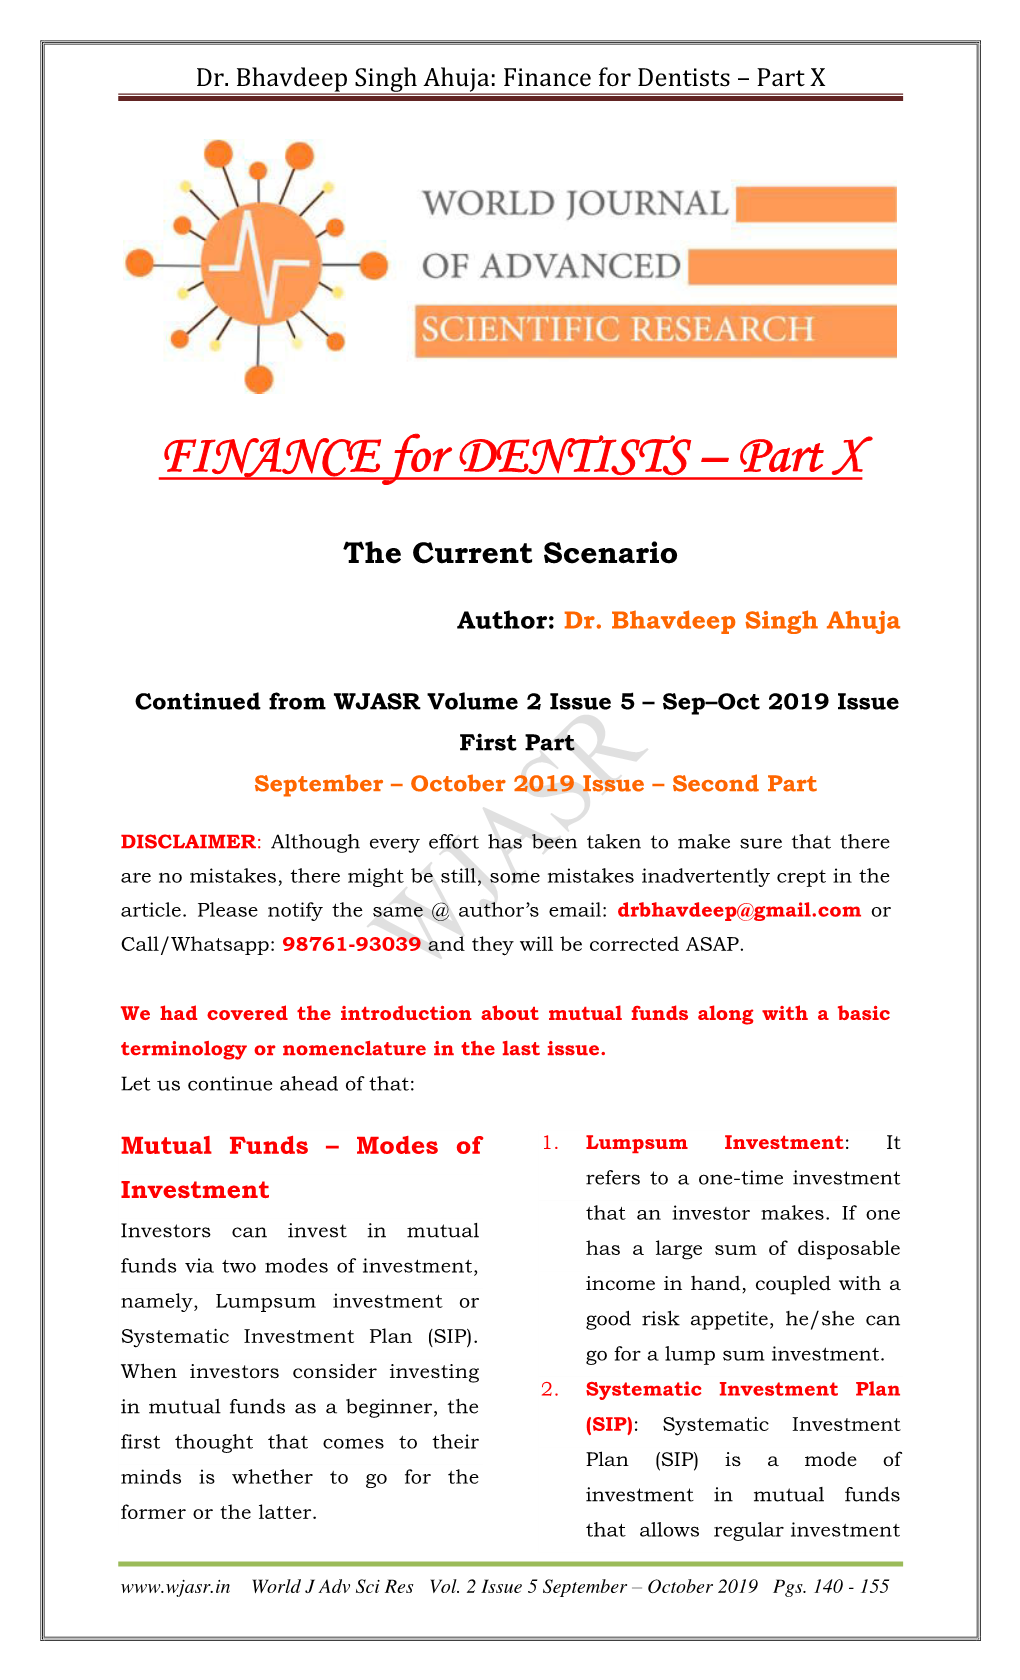 Mutual Funds Along with a Basic Terminology Or Nomenclature in the Last Issue